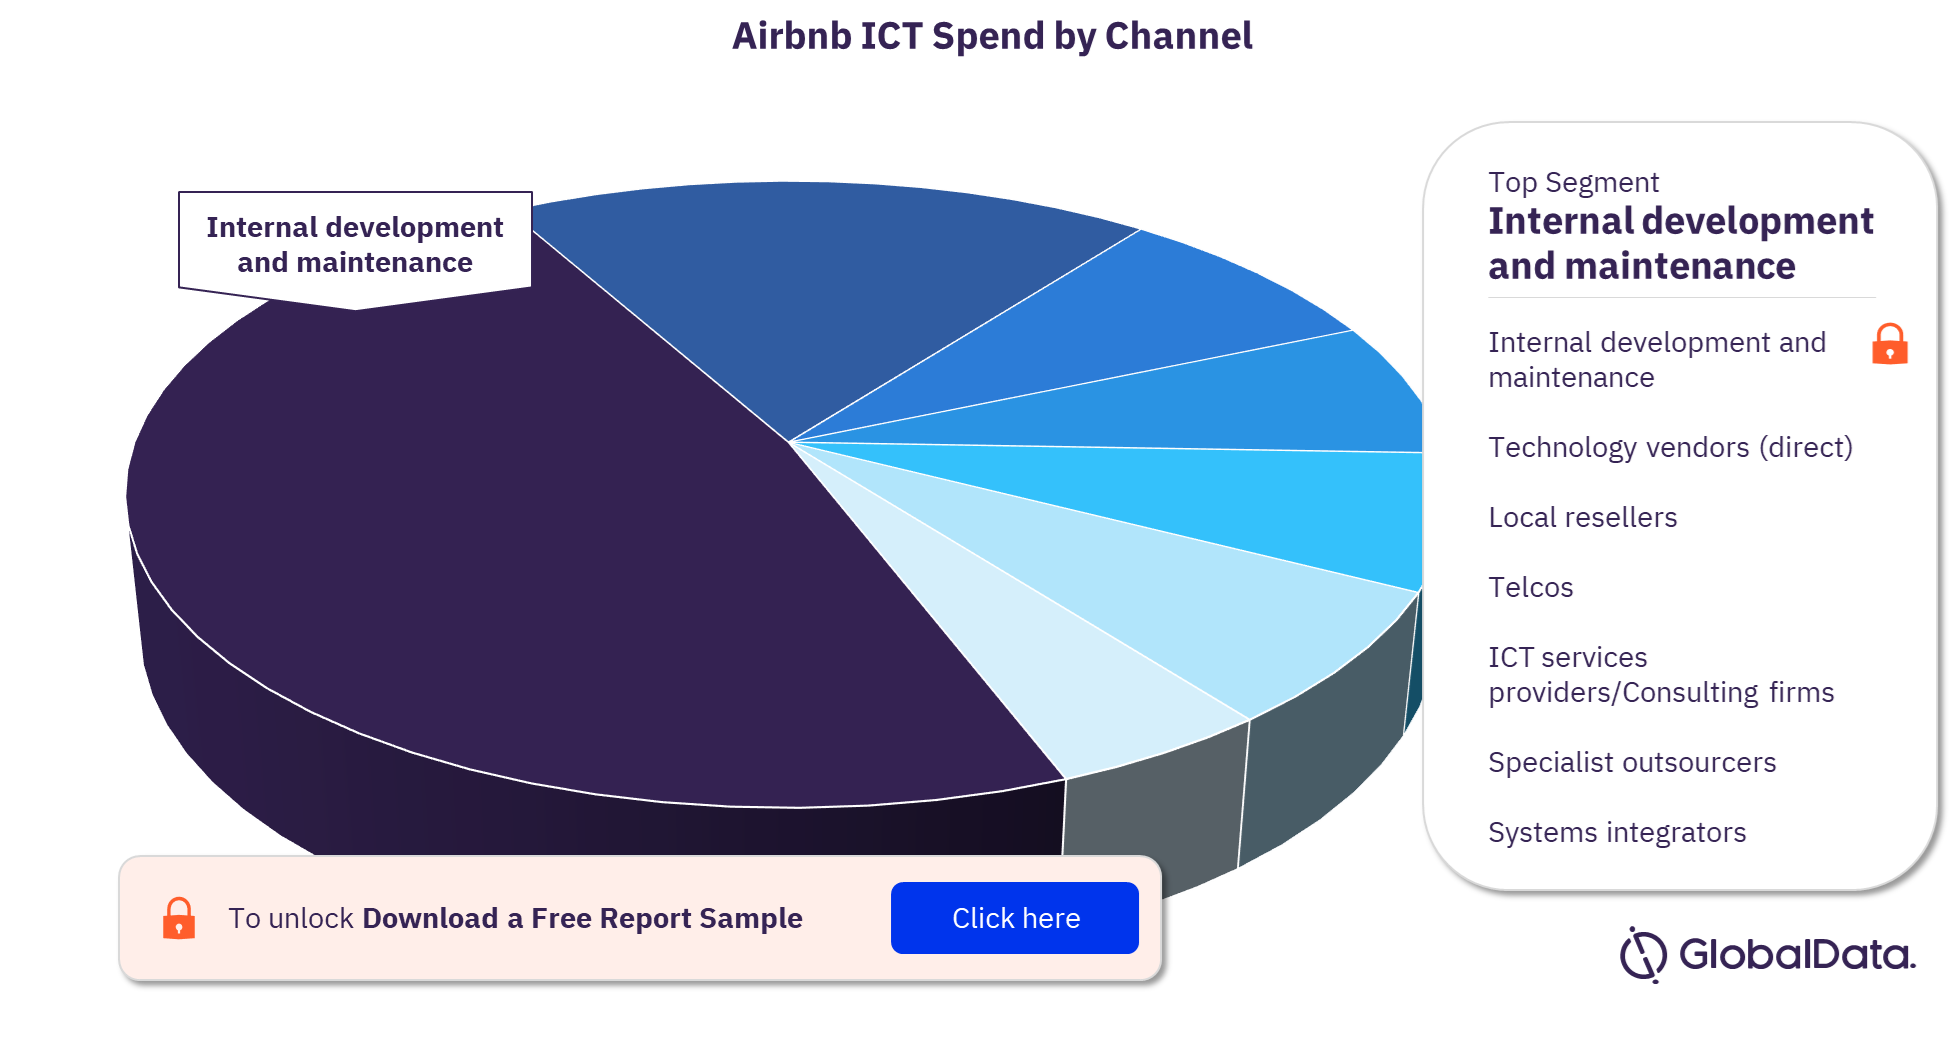 Airbnb ICT Spend by Channel 